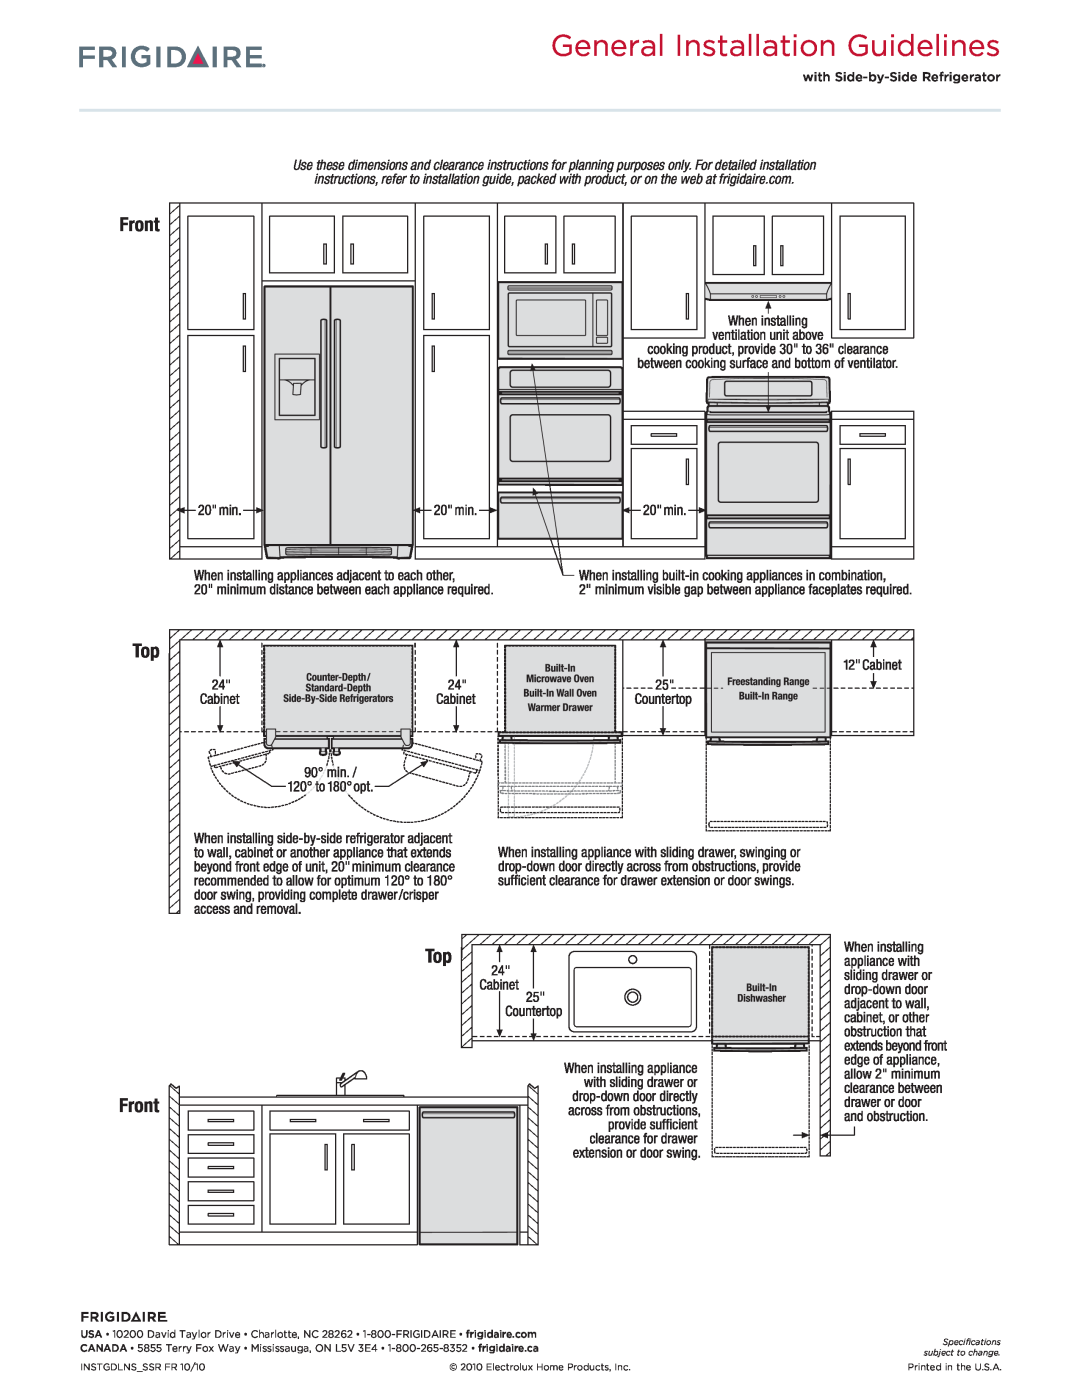 Frigidaire FGGF3041K F dimensions General Installation Guidelines, Top Front 